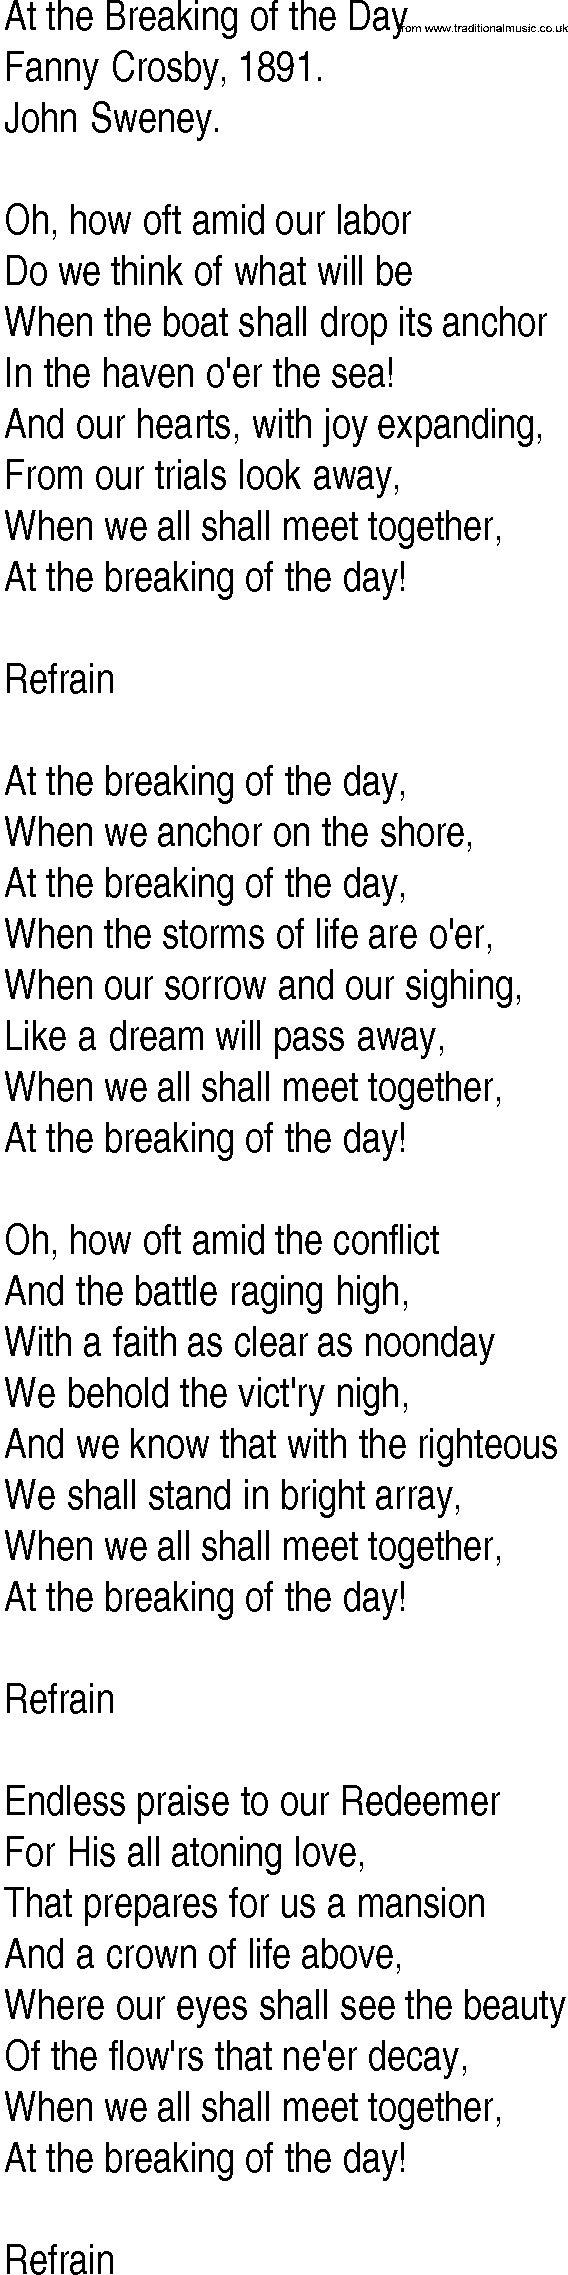 Hymn and Gospel Song: At the Breaking of the Day by Fanny Crosby lyrics